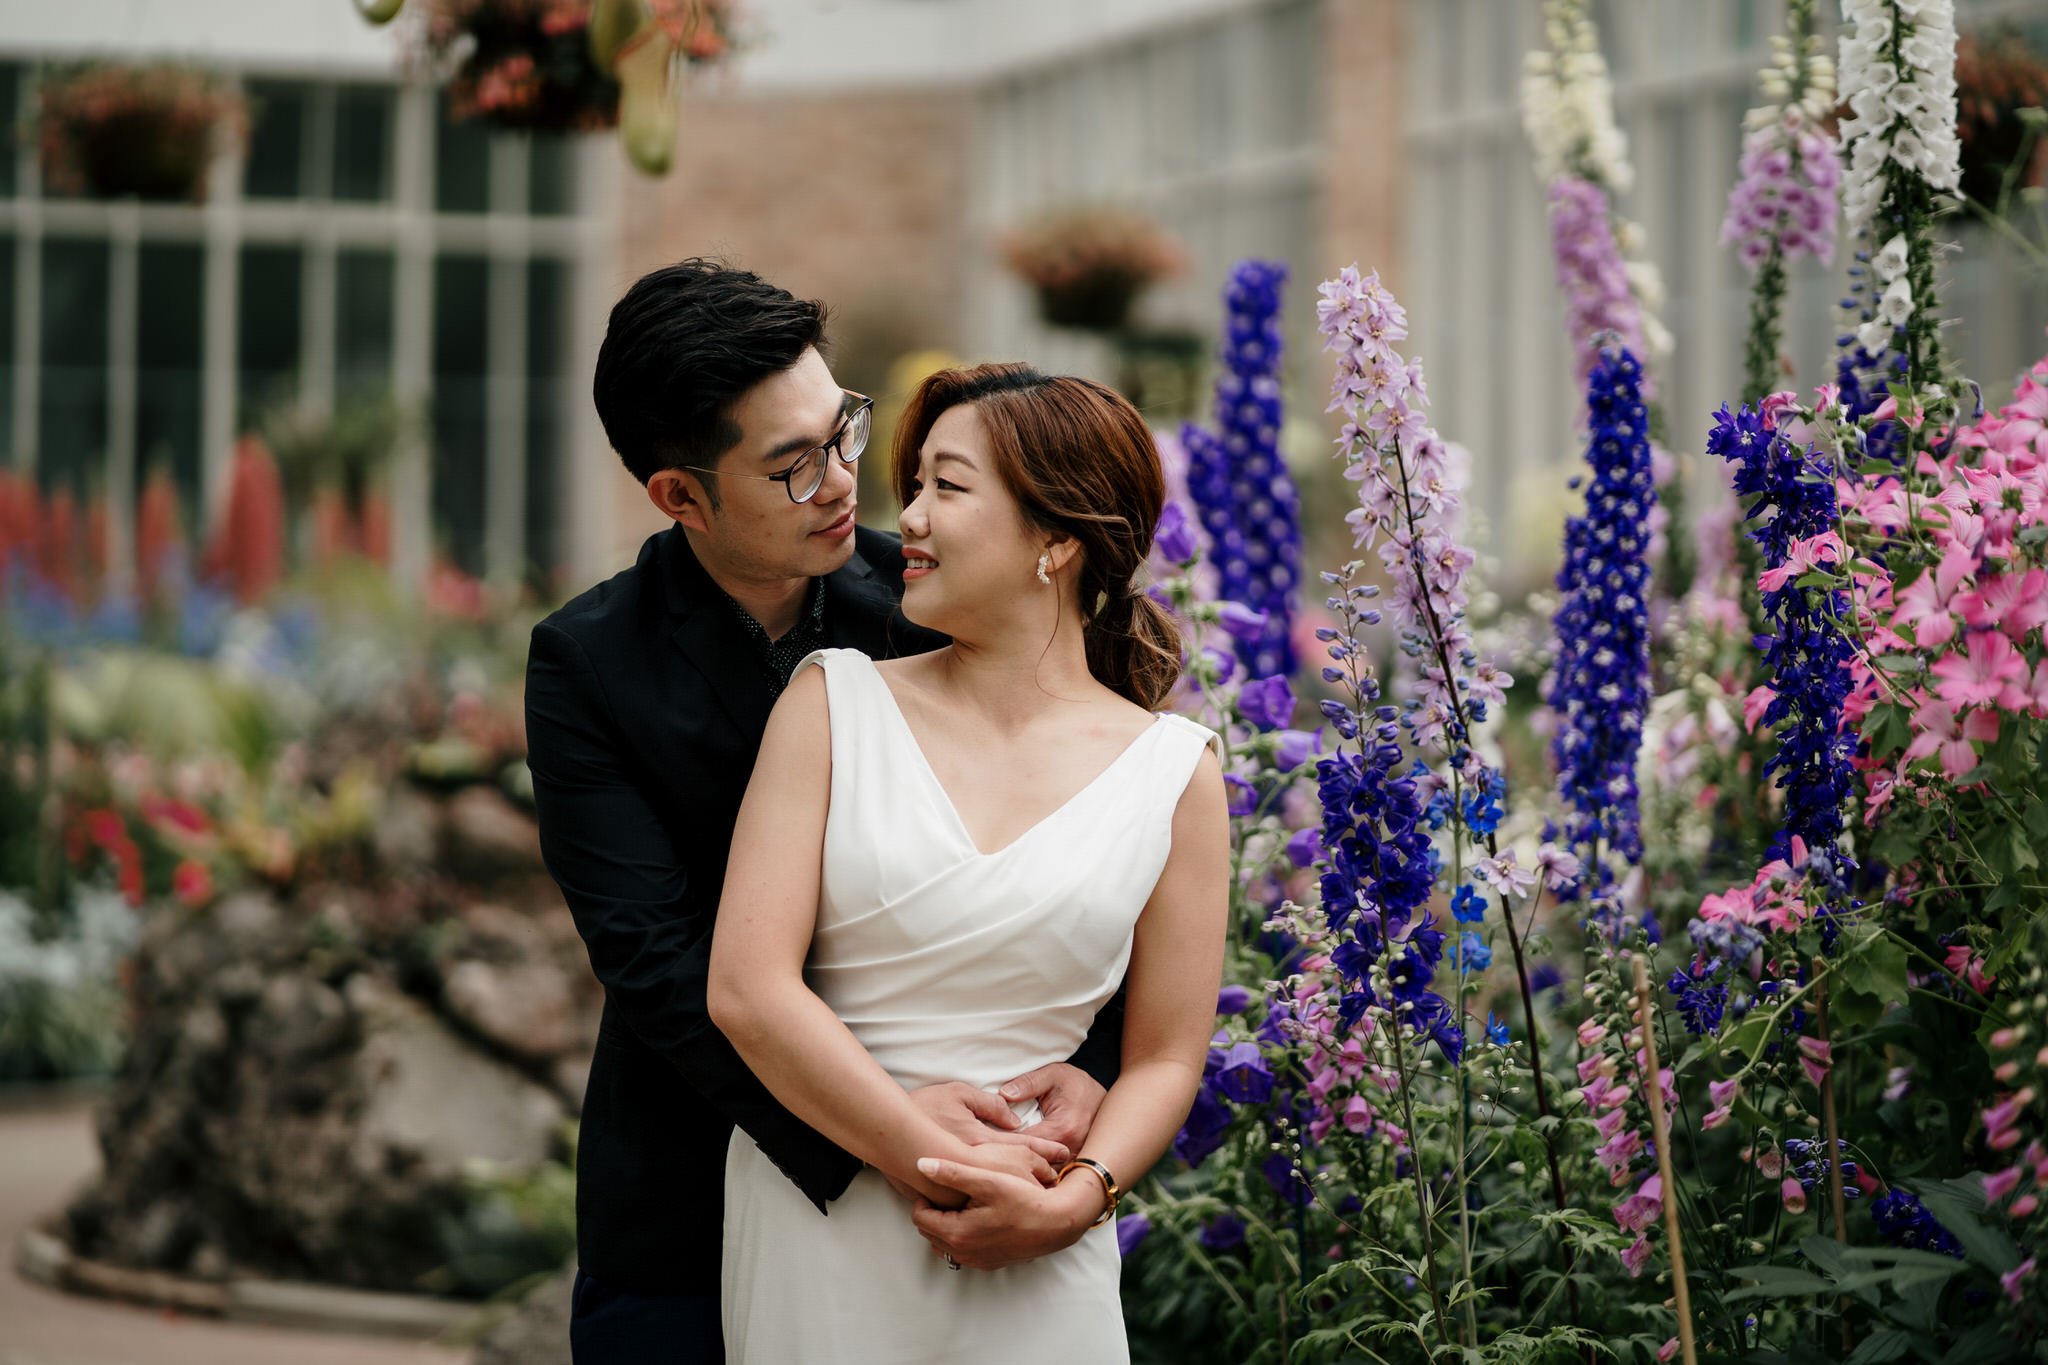 auckland-wedding-photographer-videographer-story-by-koo-koo's-jewelry-dear-white-productions-pre-wedding-engagement-photo-glass-house-botanic-fernery-garden (13).JPG